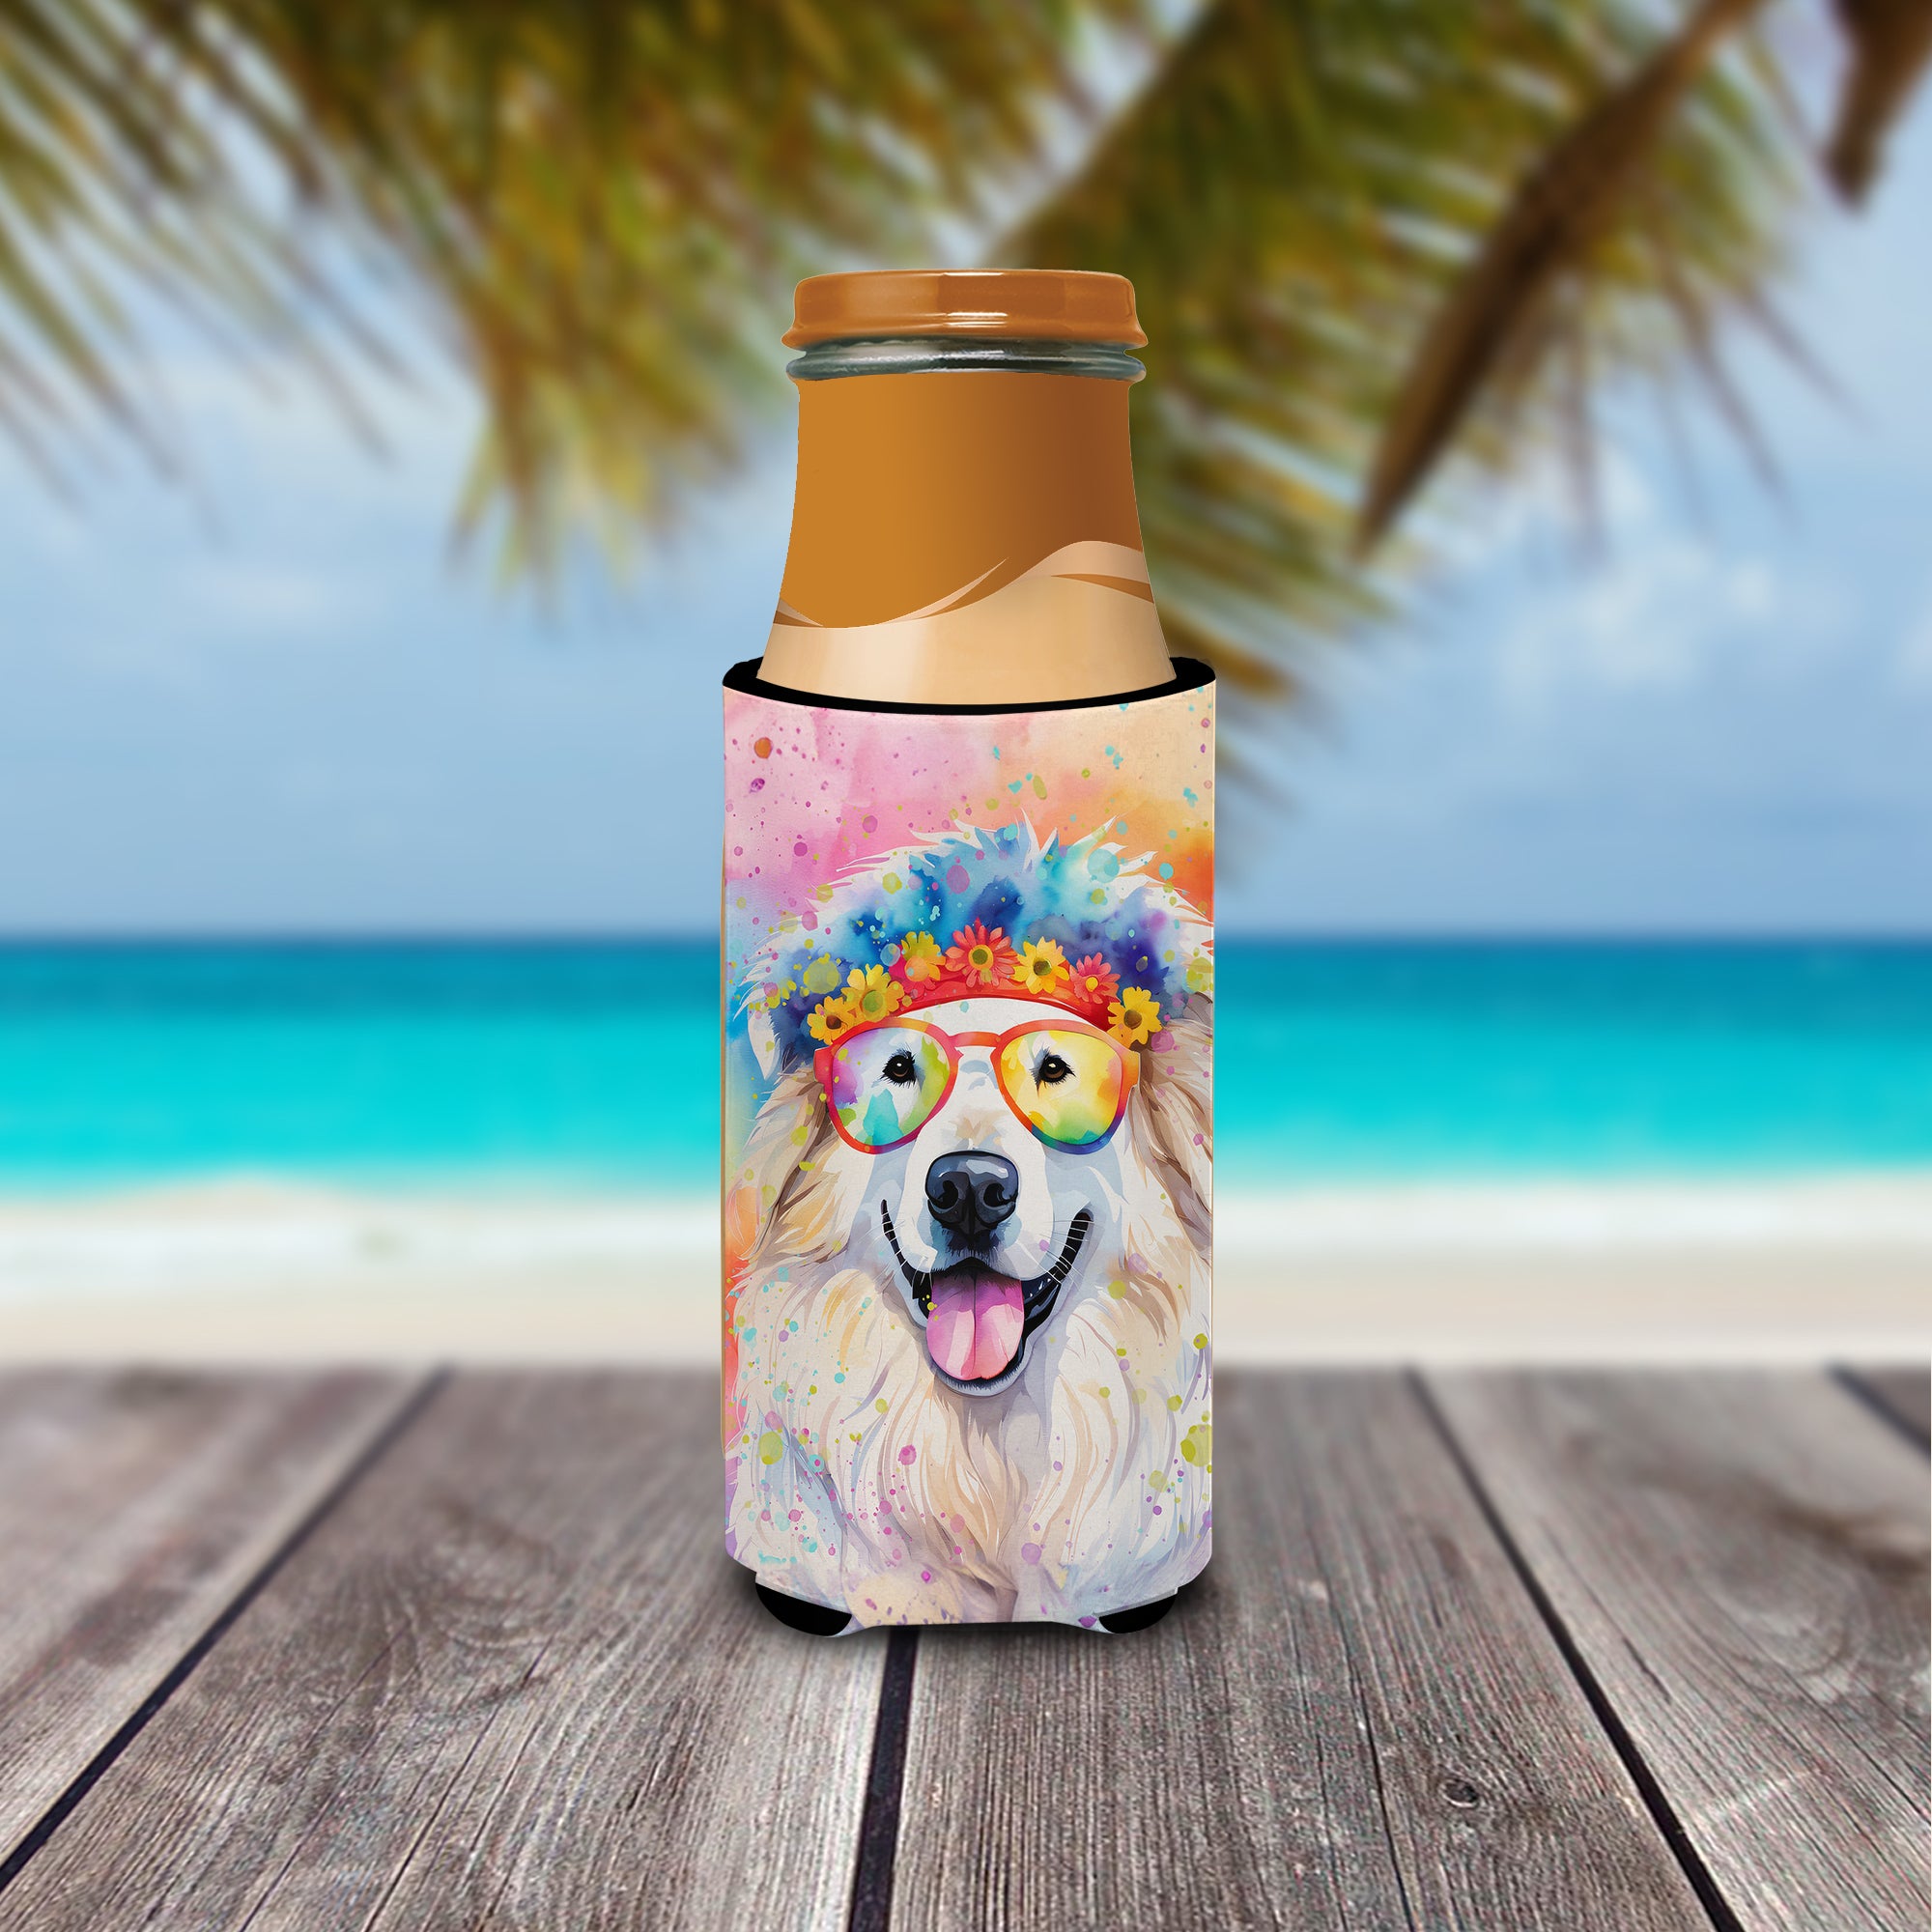 Great Pyrenees Hippie Dawg Hugger for Ultra Slim Cans